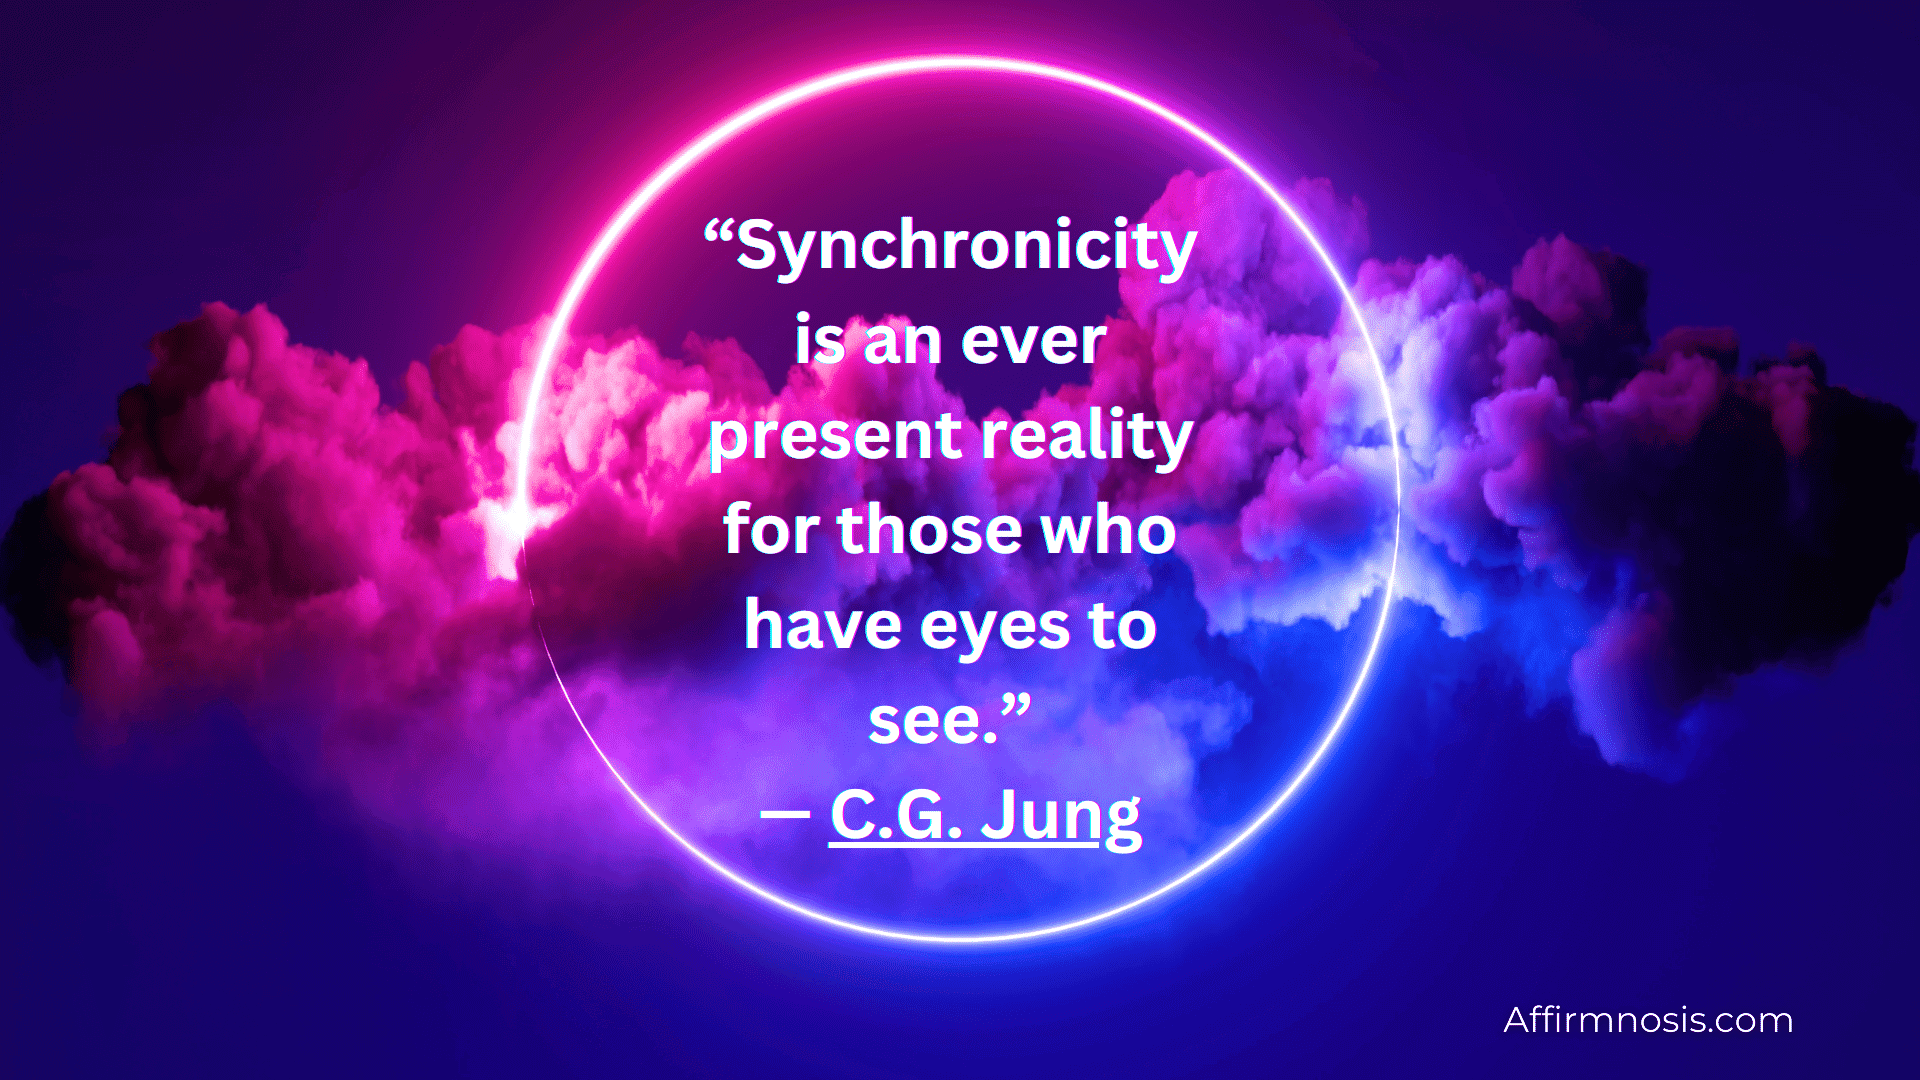 “Synchronicity is an ever present reality for those who have eyes to see.” — C.G. Jung